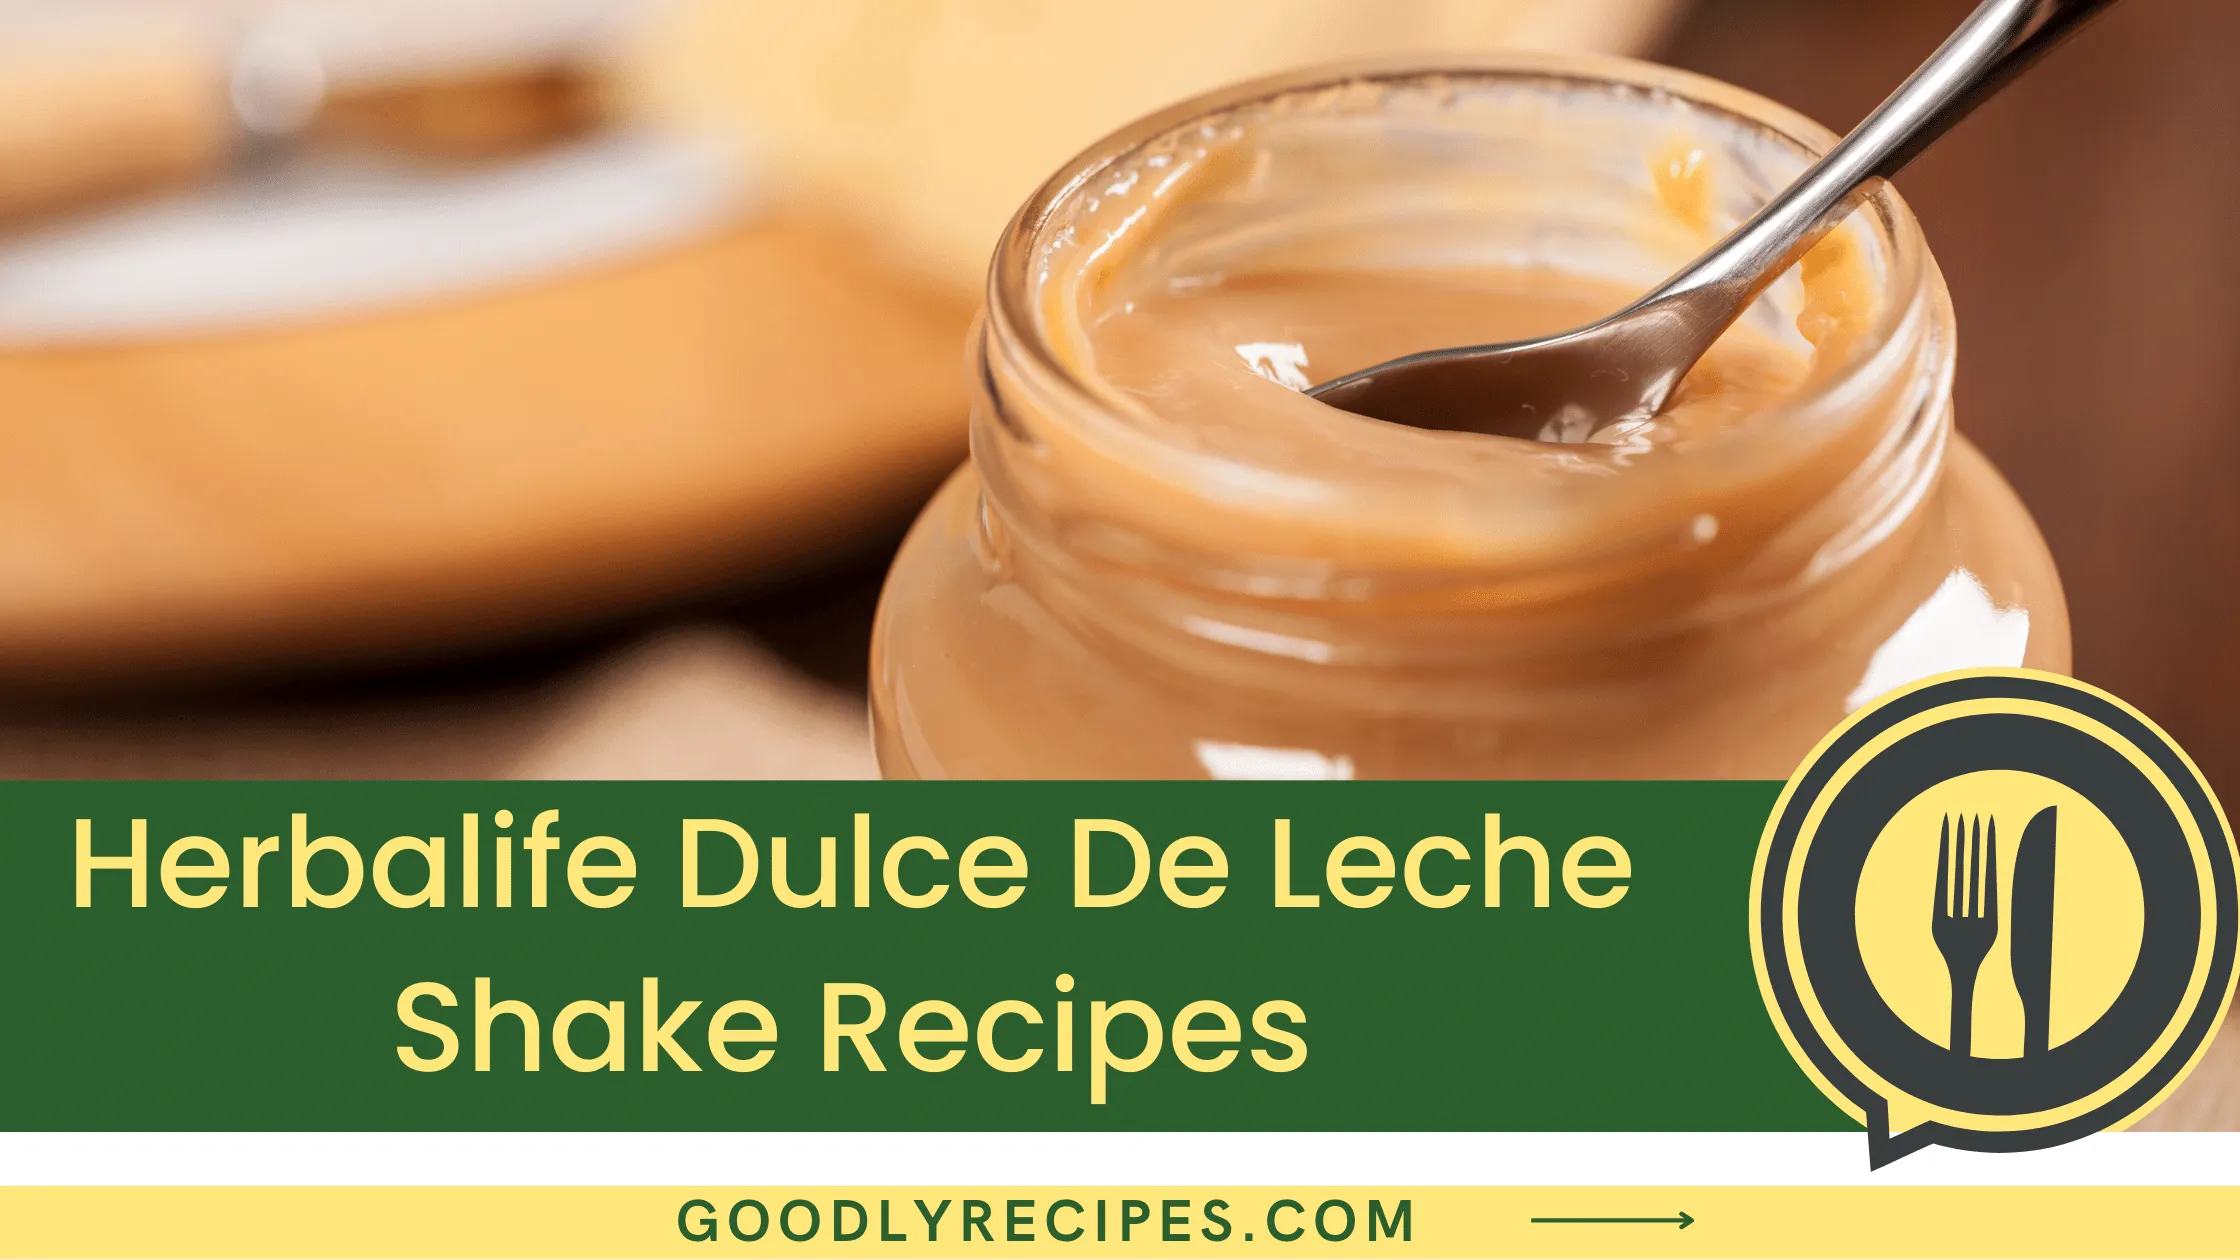 What is Herbalife Dulce De Leche Shake?